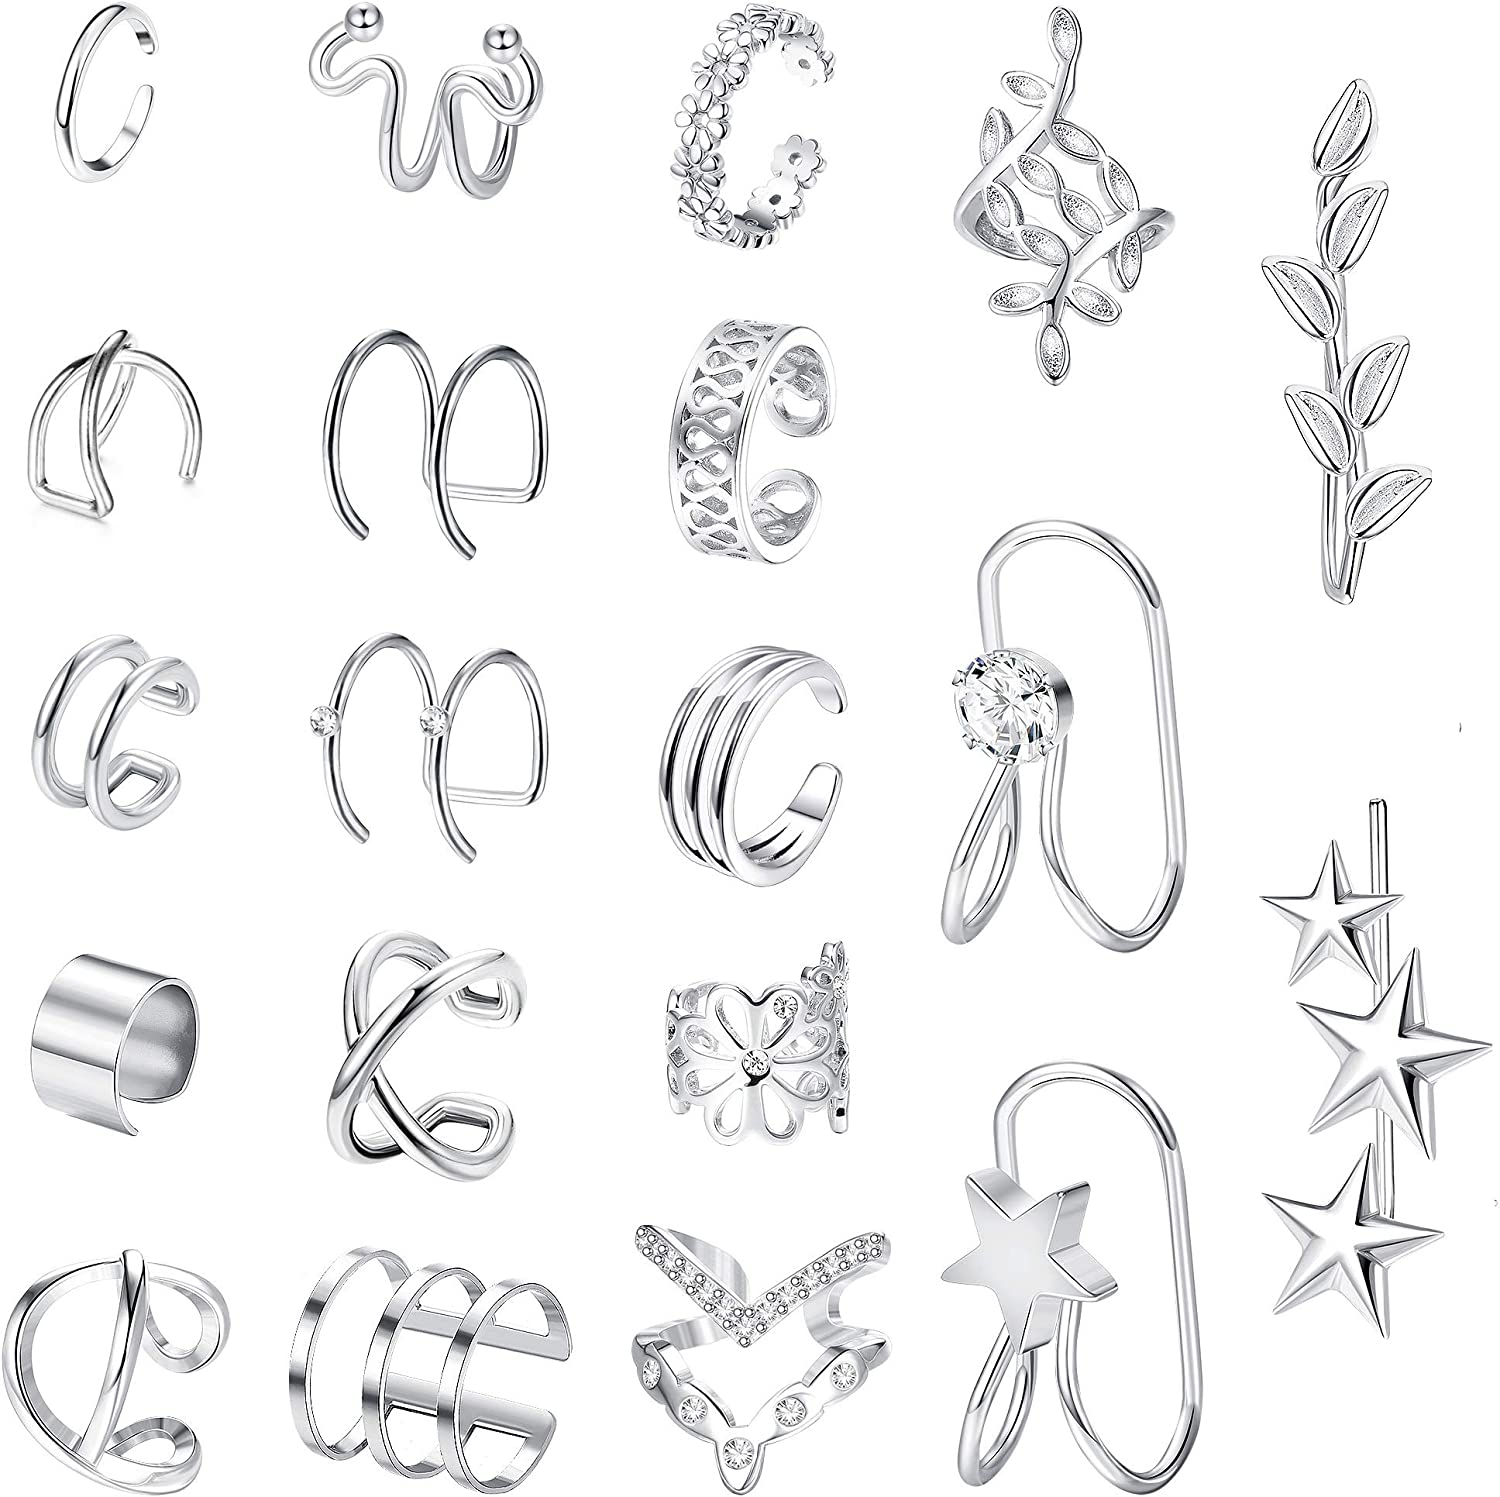 LOYALLOOK 20PCS Ear Cuff for Women Stainless Steel Non-Piercing Ears Helix Cartilage Clip On Wrap Earring Ear Cuff Set for Women Men